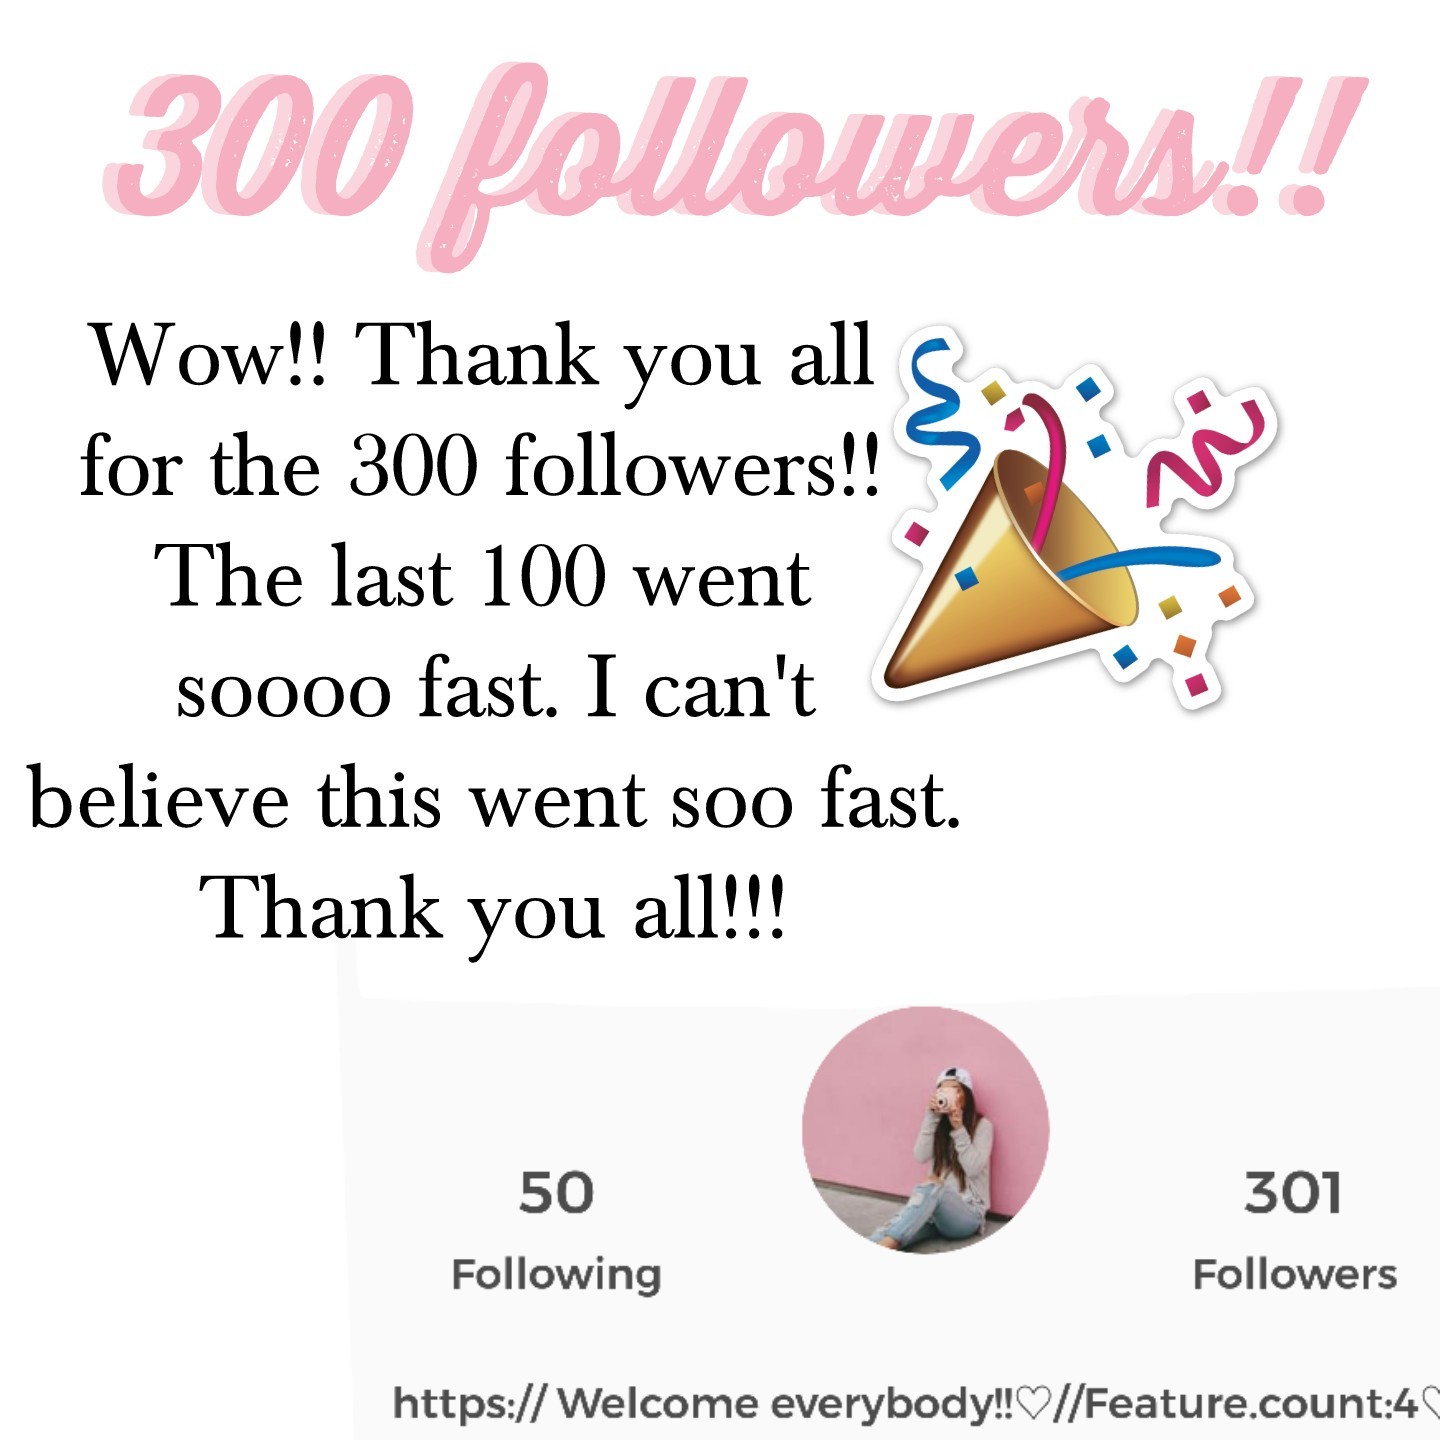 I just want to thank you all!!! ❤❤